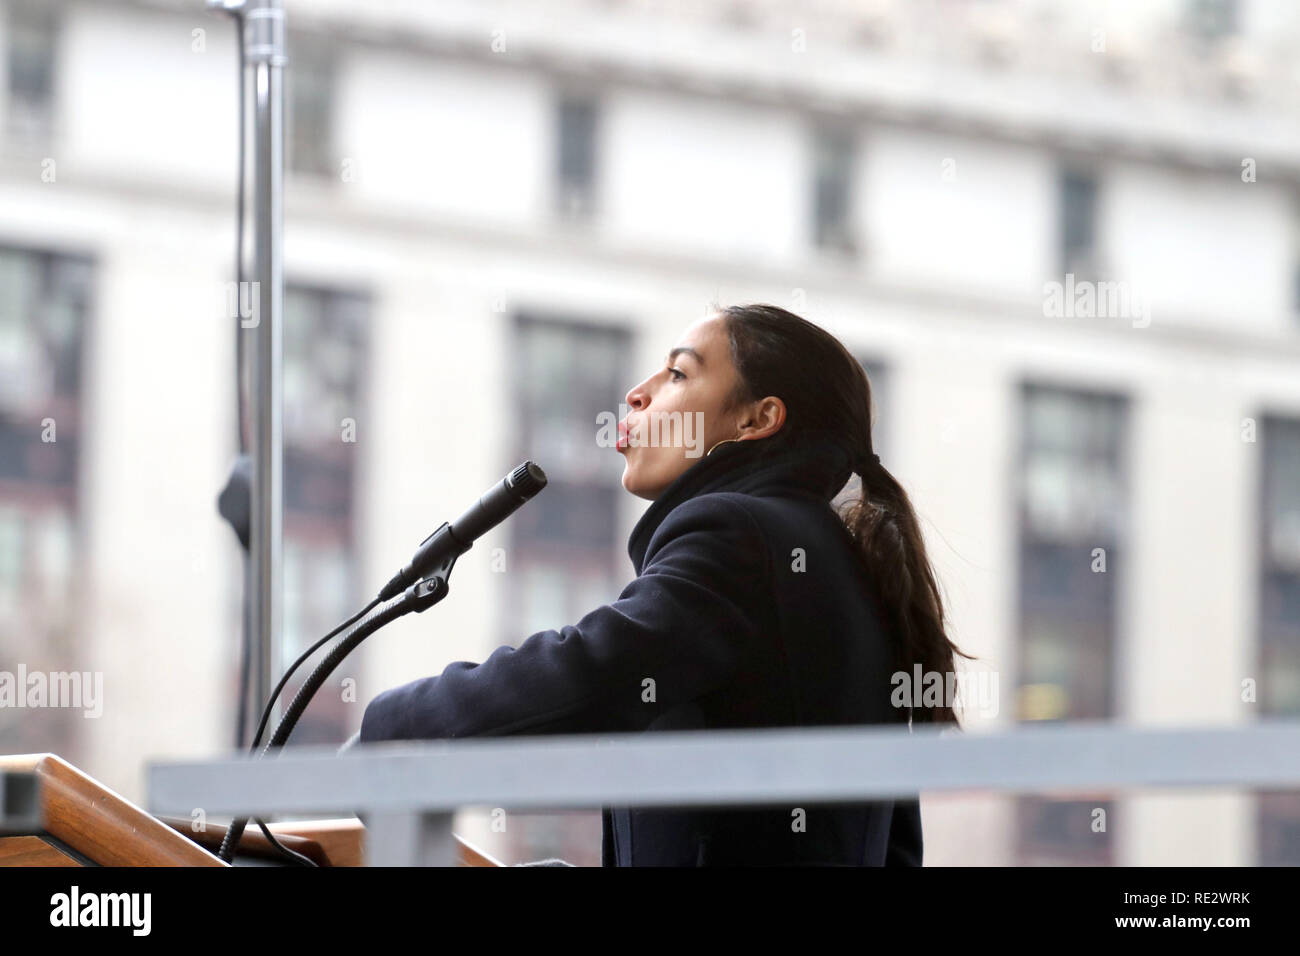 New York City, New York, USA. 19th Jan, 2019. U.S. Rep. Alexandria Ocasio-Cortez (D-Queens) appeared at the Women's March Alliance co-hosted rally with the New York Immigration Coalition in Foley Square on 19 January, 2019. The rally by the controversial organization drew thousands and featured appearances by U.S. Rep. Alexandria Ocasio-Cortez (D-Queens) and American feminist, journalist, and social political Gloria Steinem. Credit: G. Ronald Lopez/ZUMA Wire/Alamy Live News Stock Photo